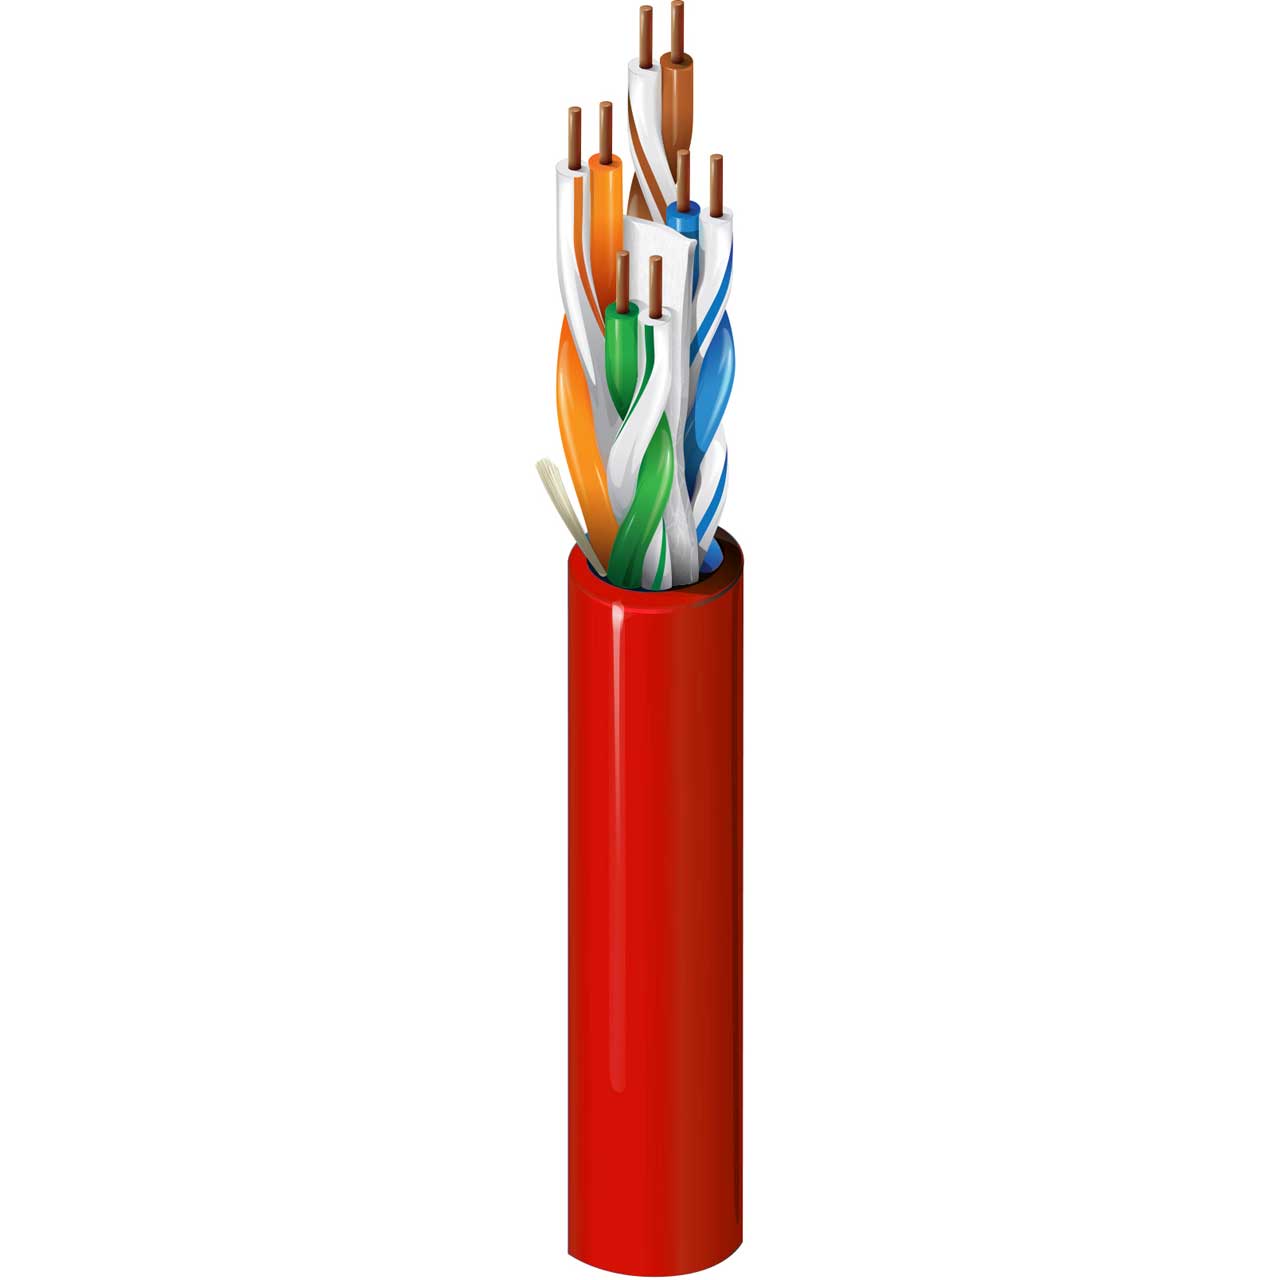 Belden 2412 23 AWG Enhanced Category 6 350MHz 350MHz Nonbonded-Pair Cable 1000 Foot - Red BL-2412-1000RD